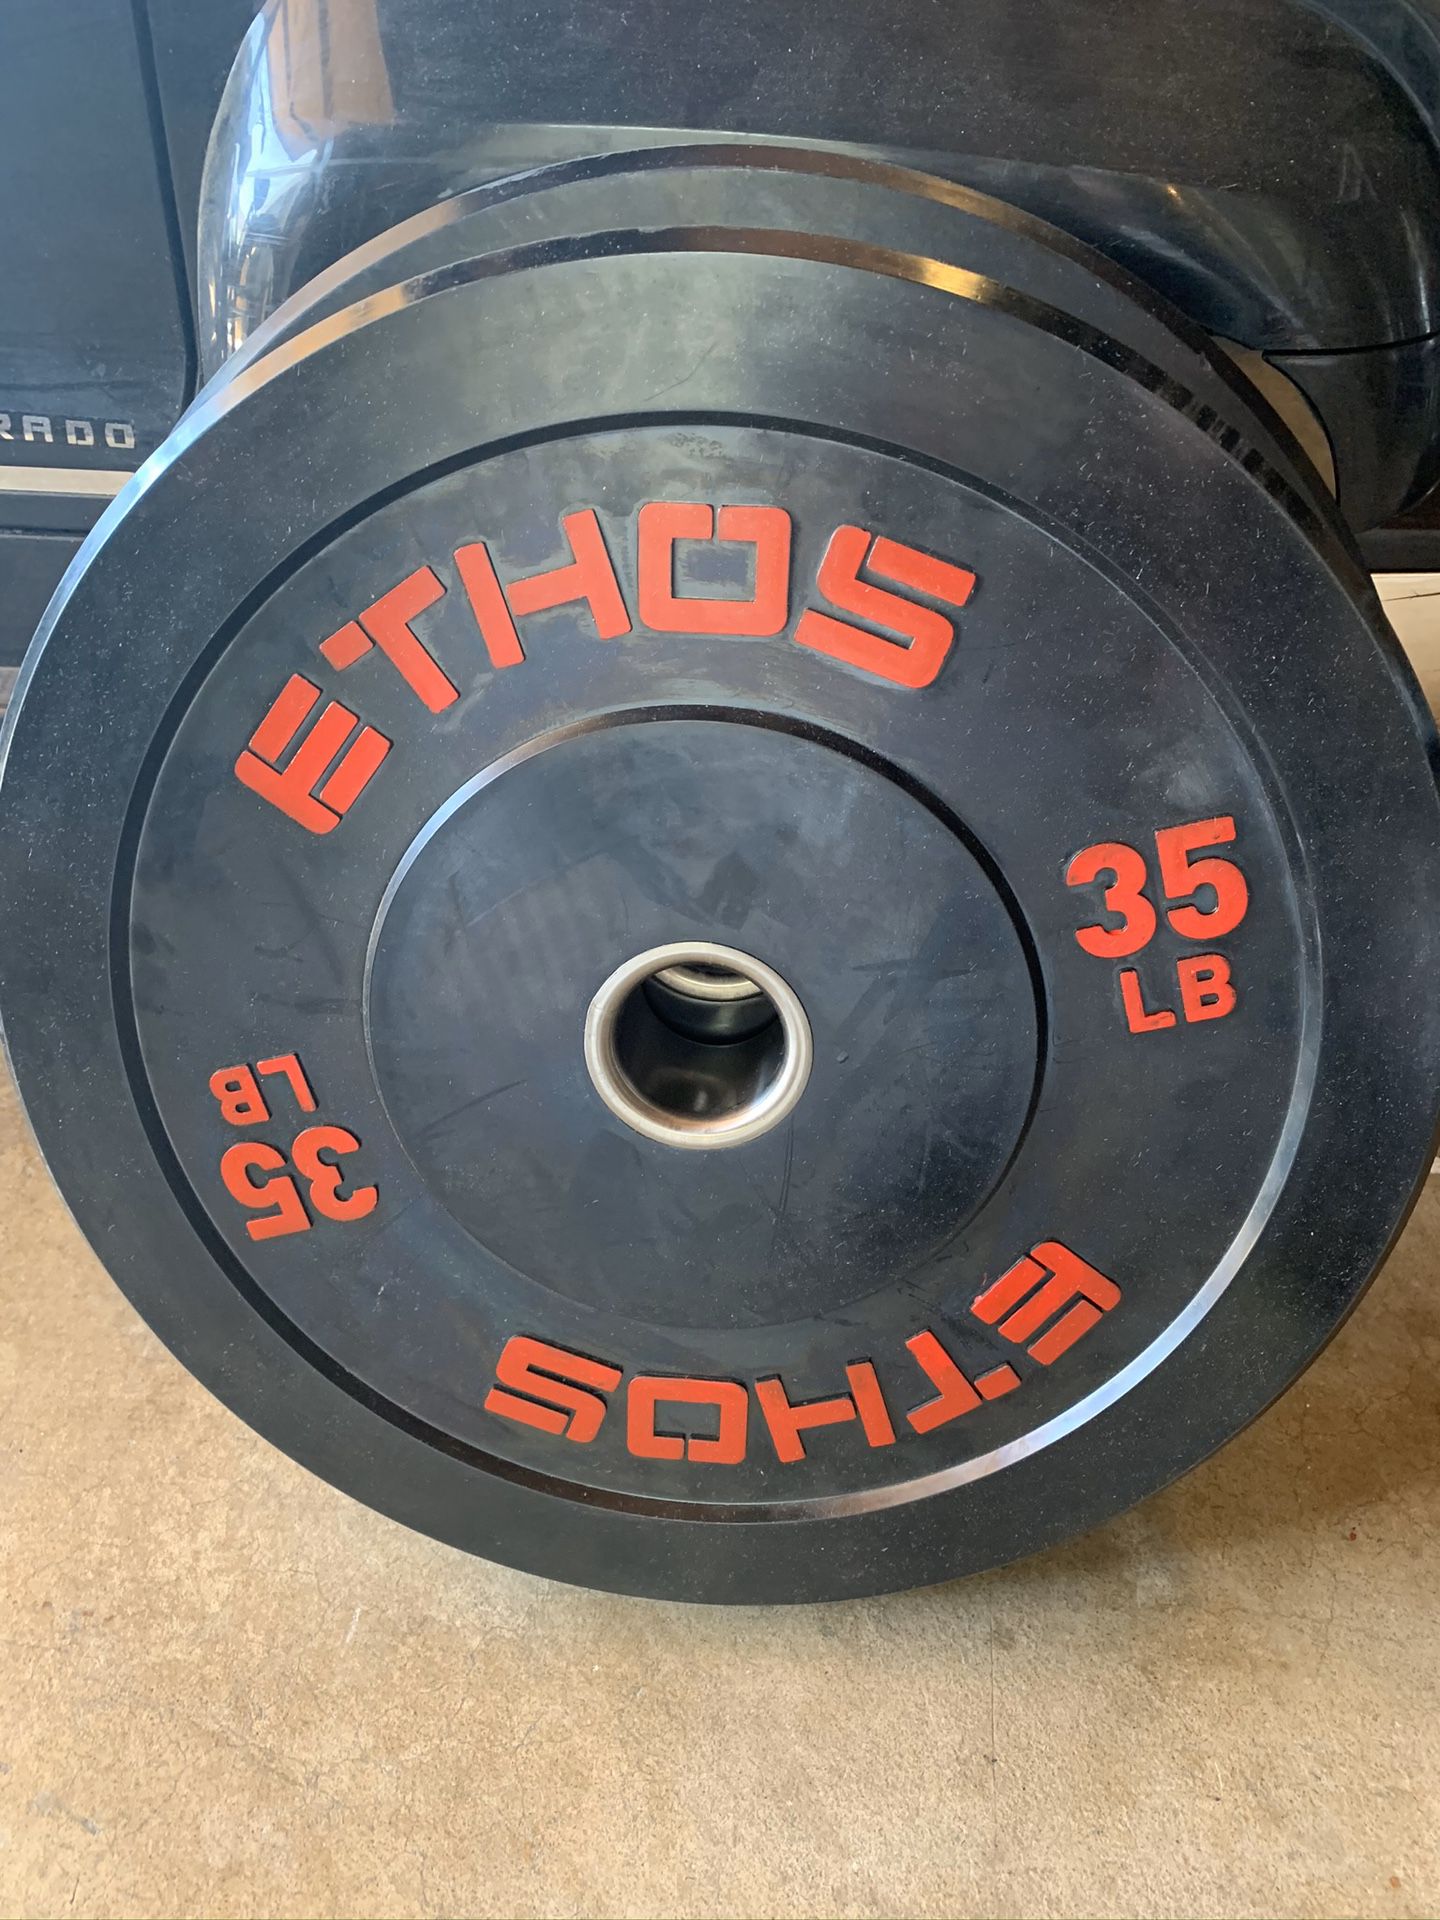 Brand new bumper plates 35s and 25s